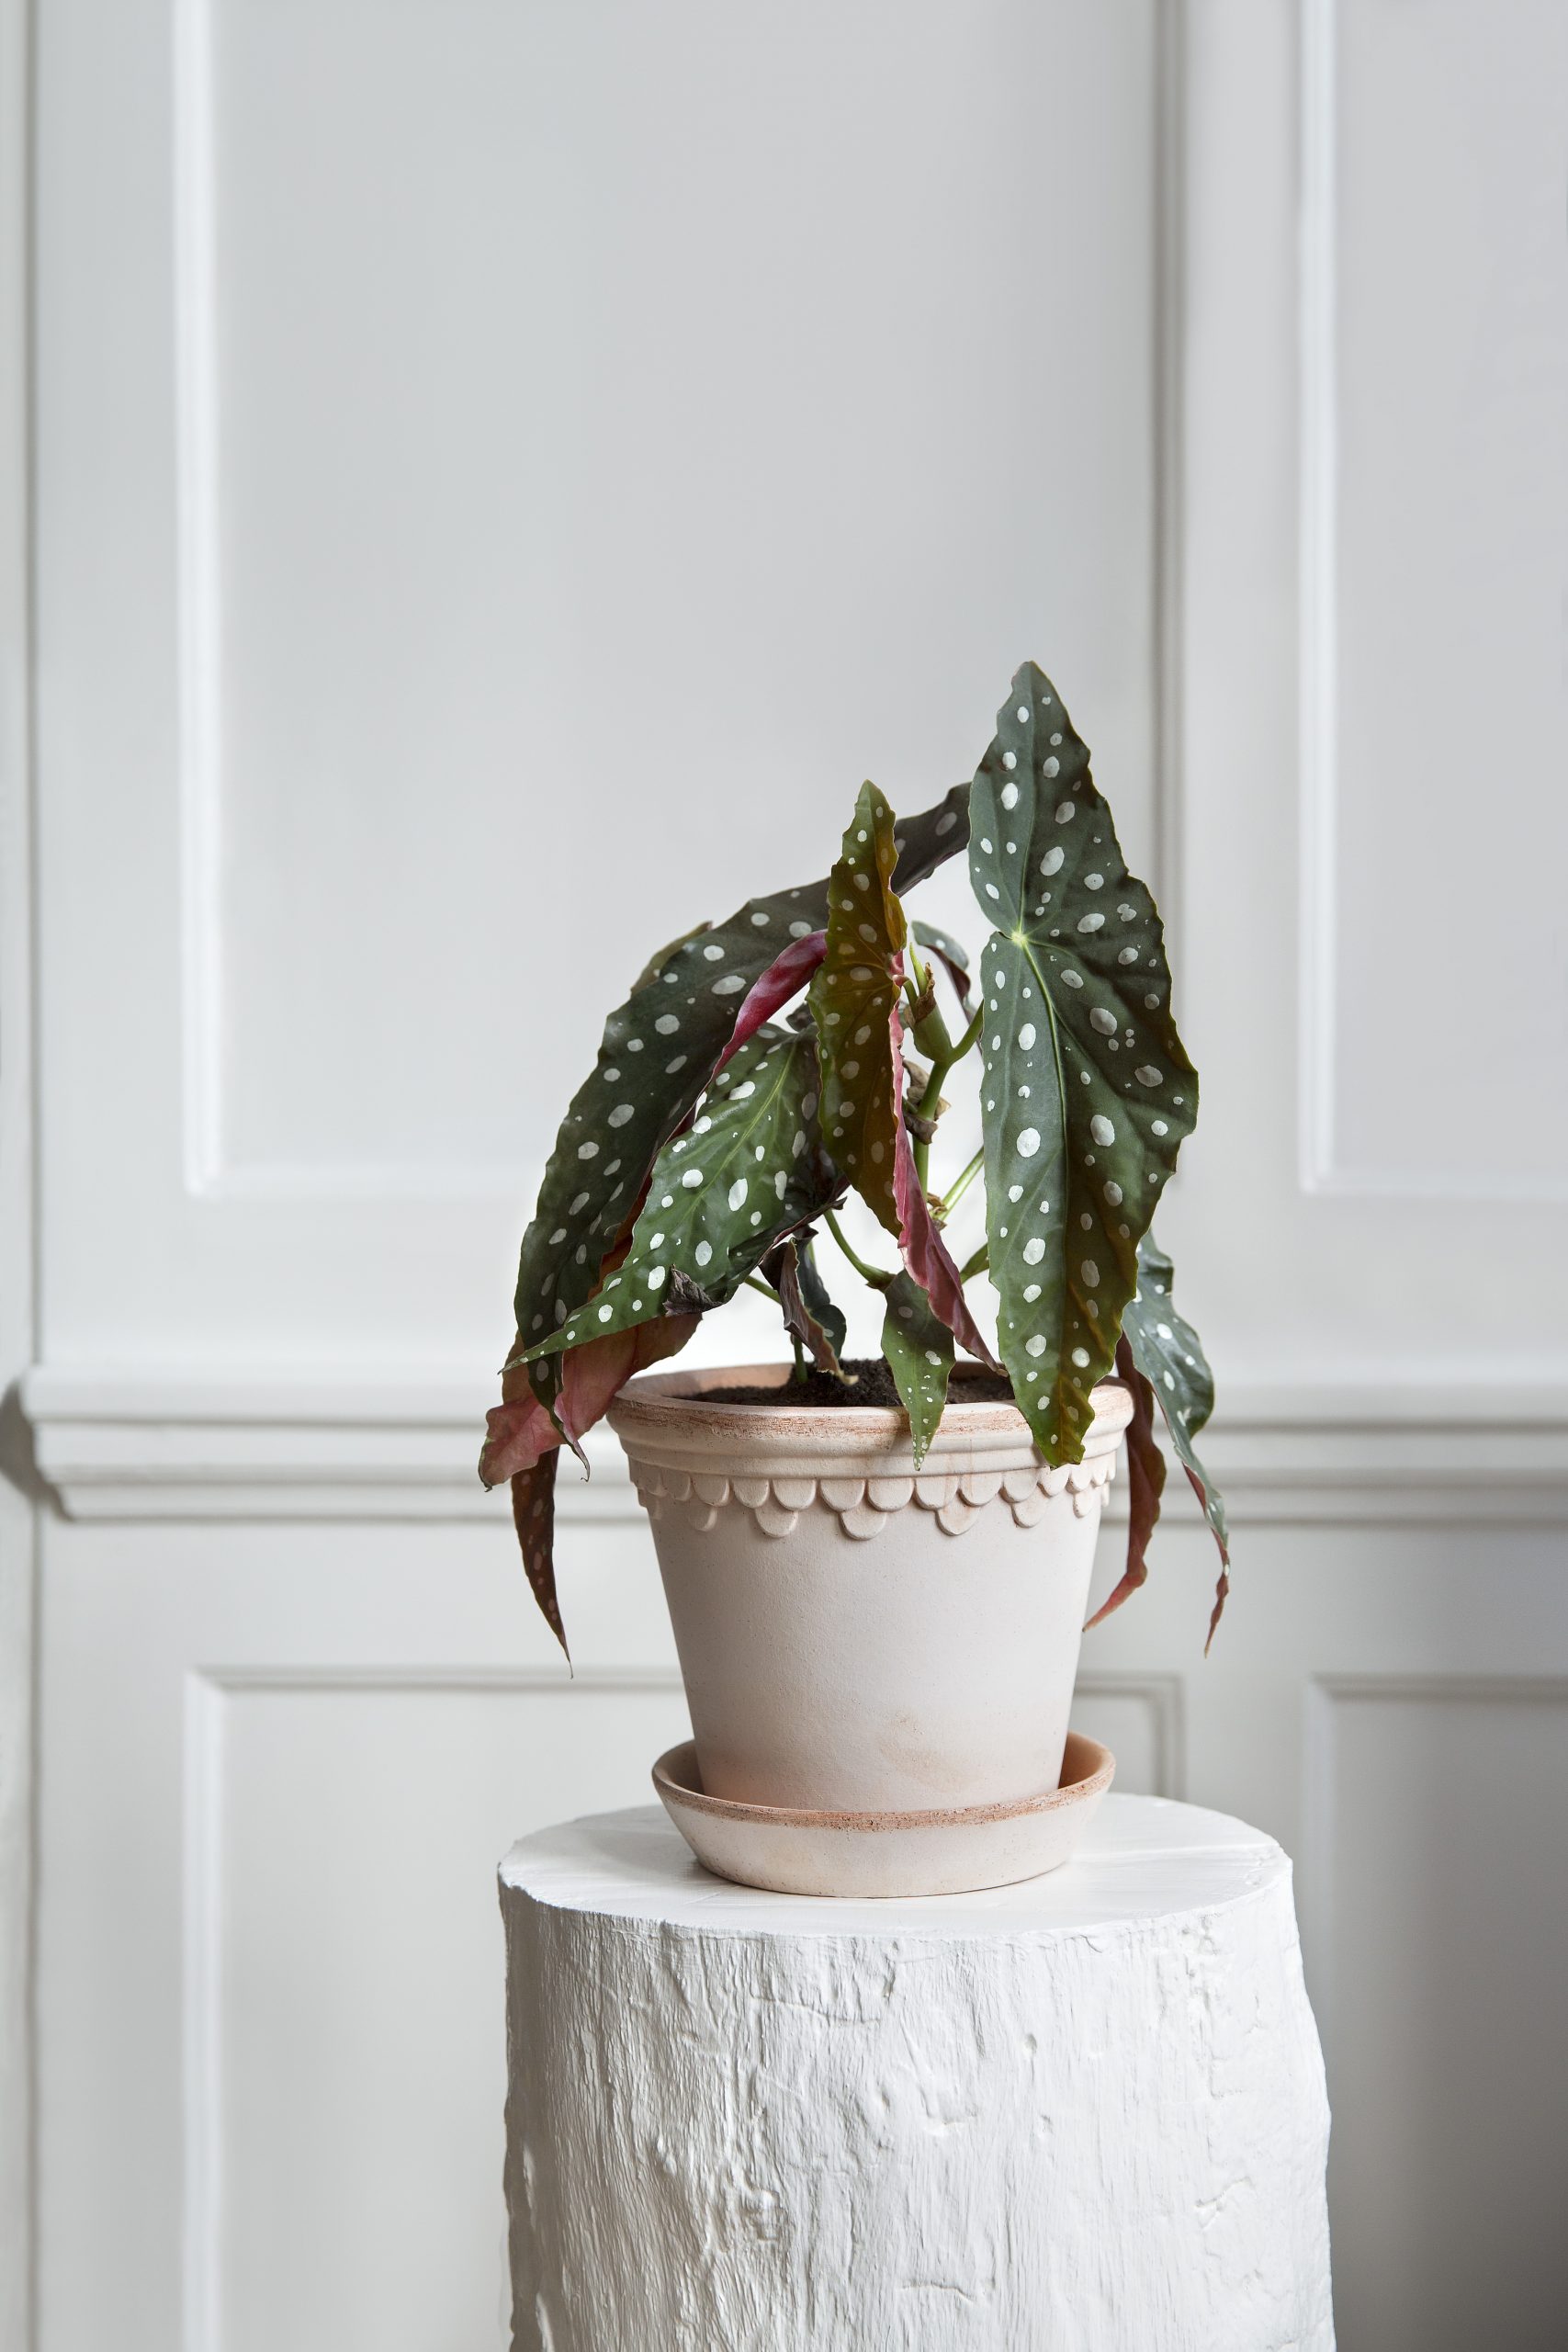 This classic Københavner pot in a classic space